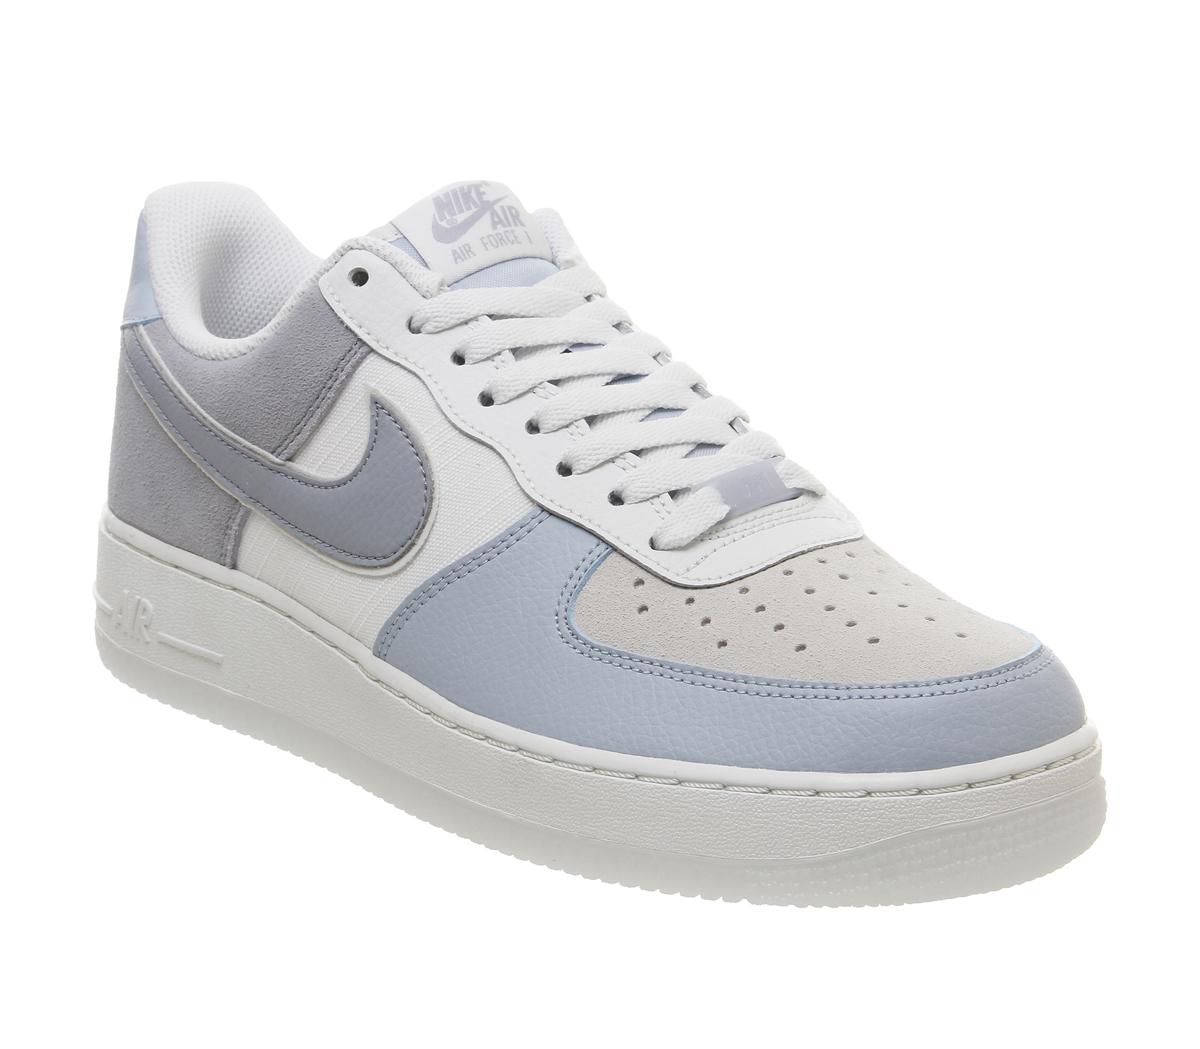 nike air force 1 low light armory blue obsidian mist